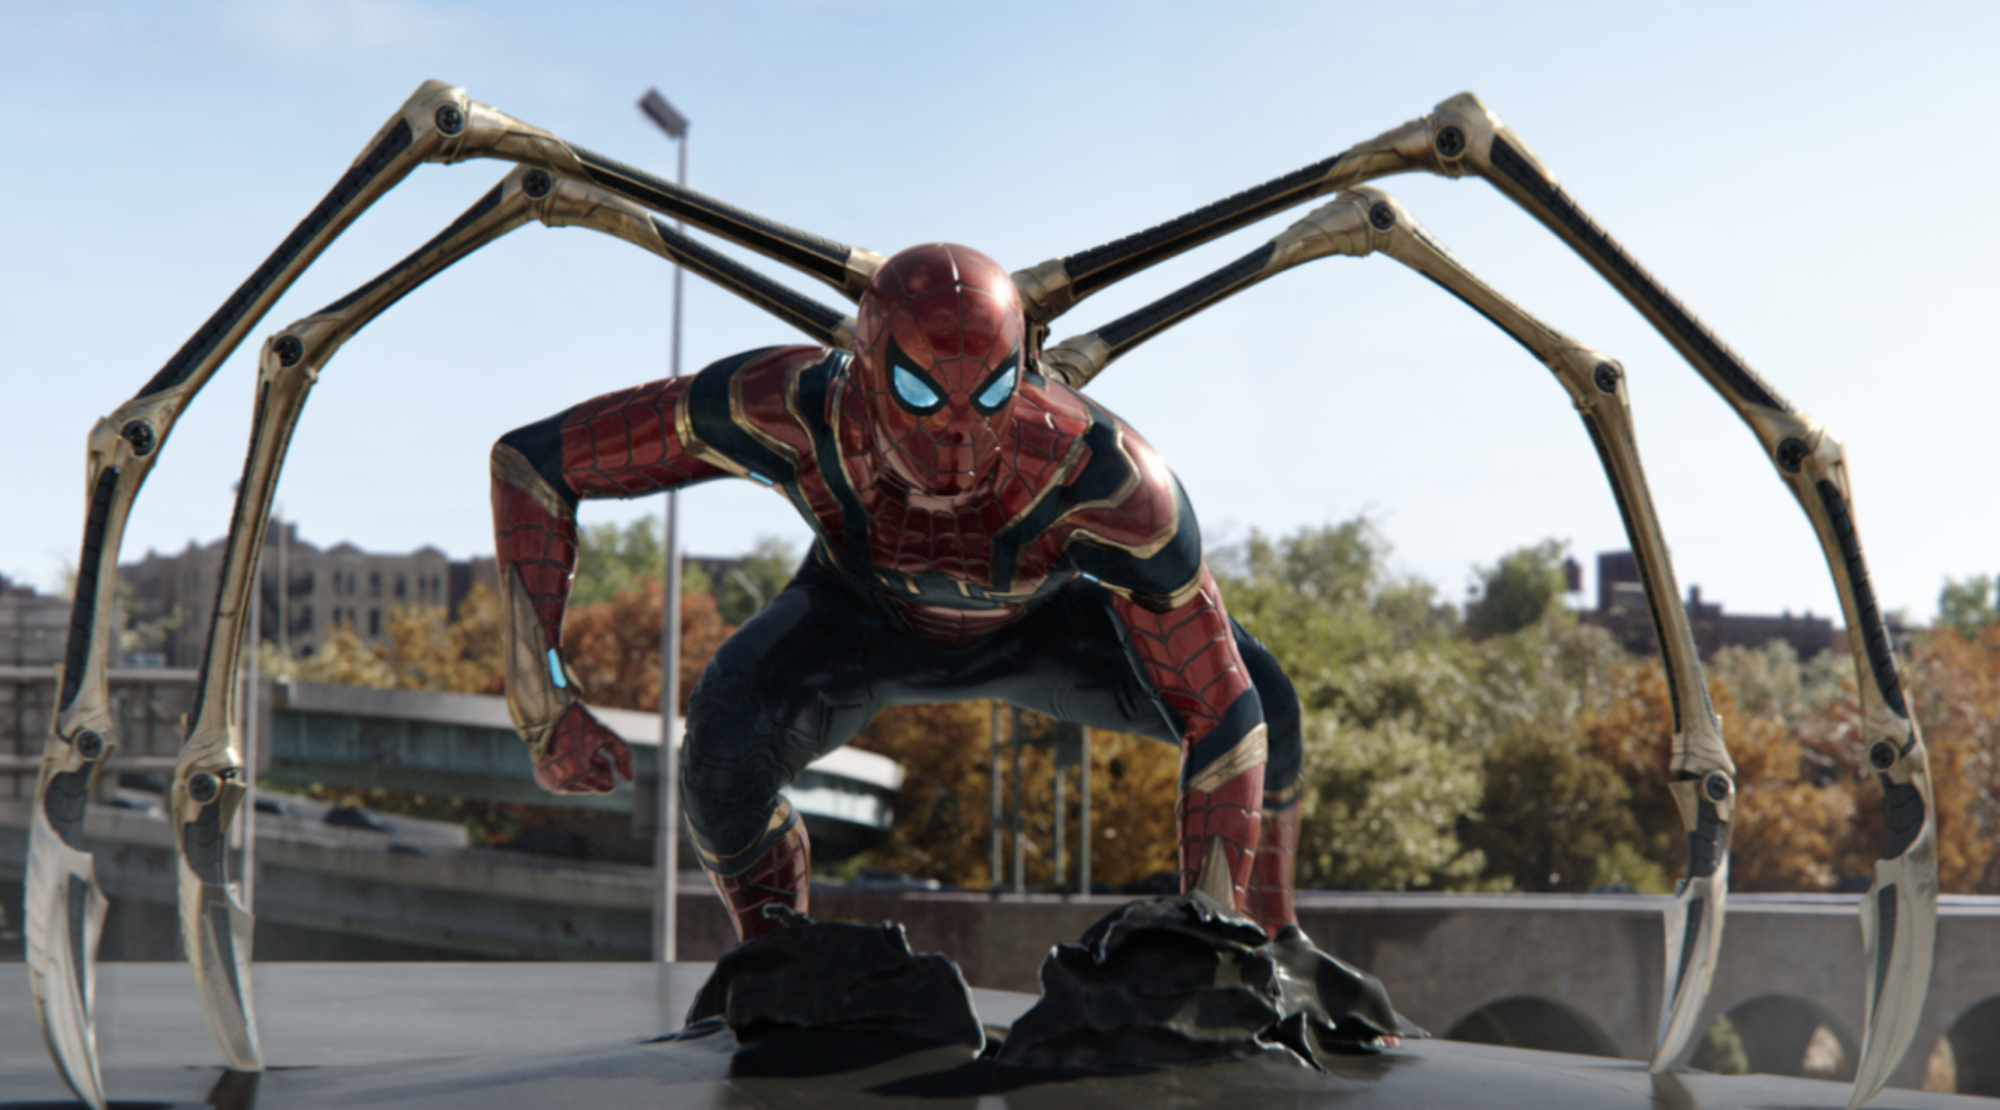 A man in a red superhero costume crouches with metal limbs protruding from his back.